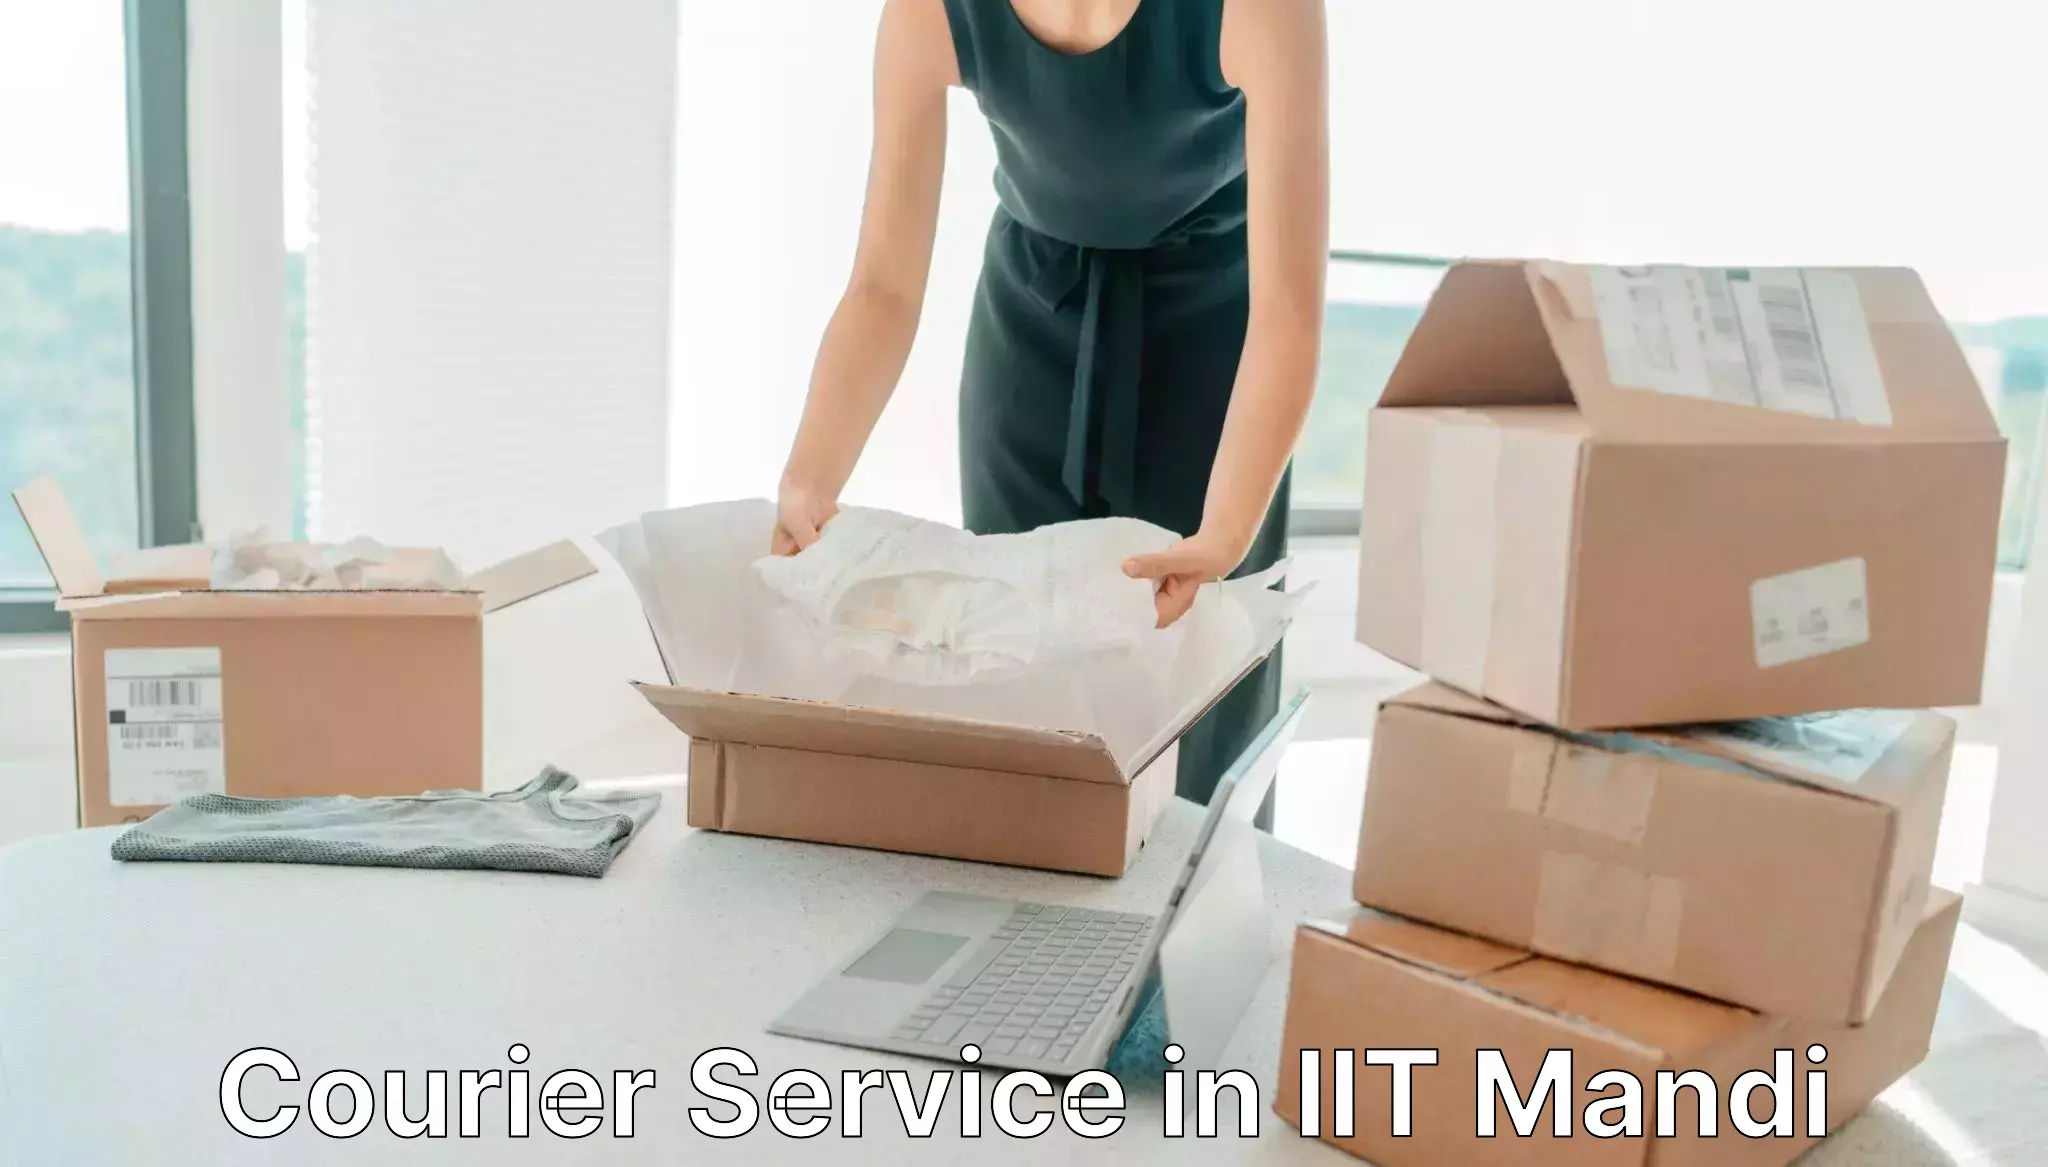 Tailored delivery services in IIT Mandi